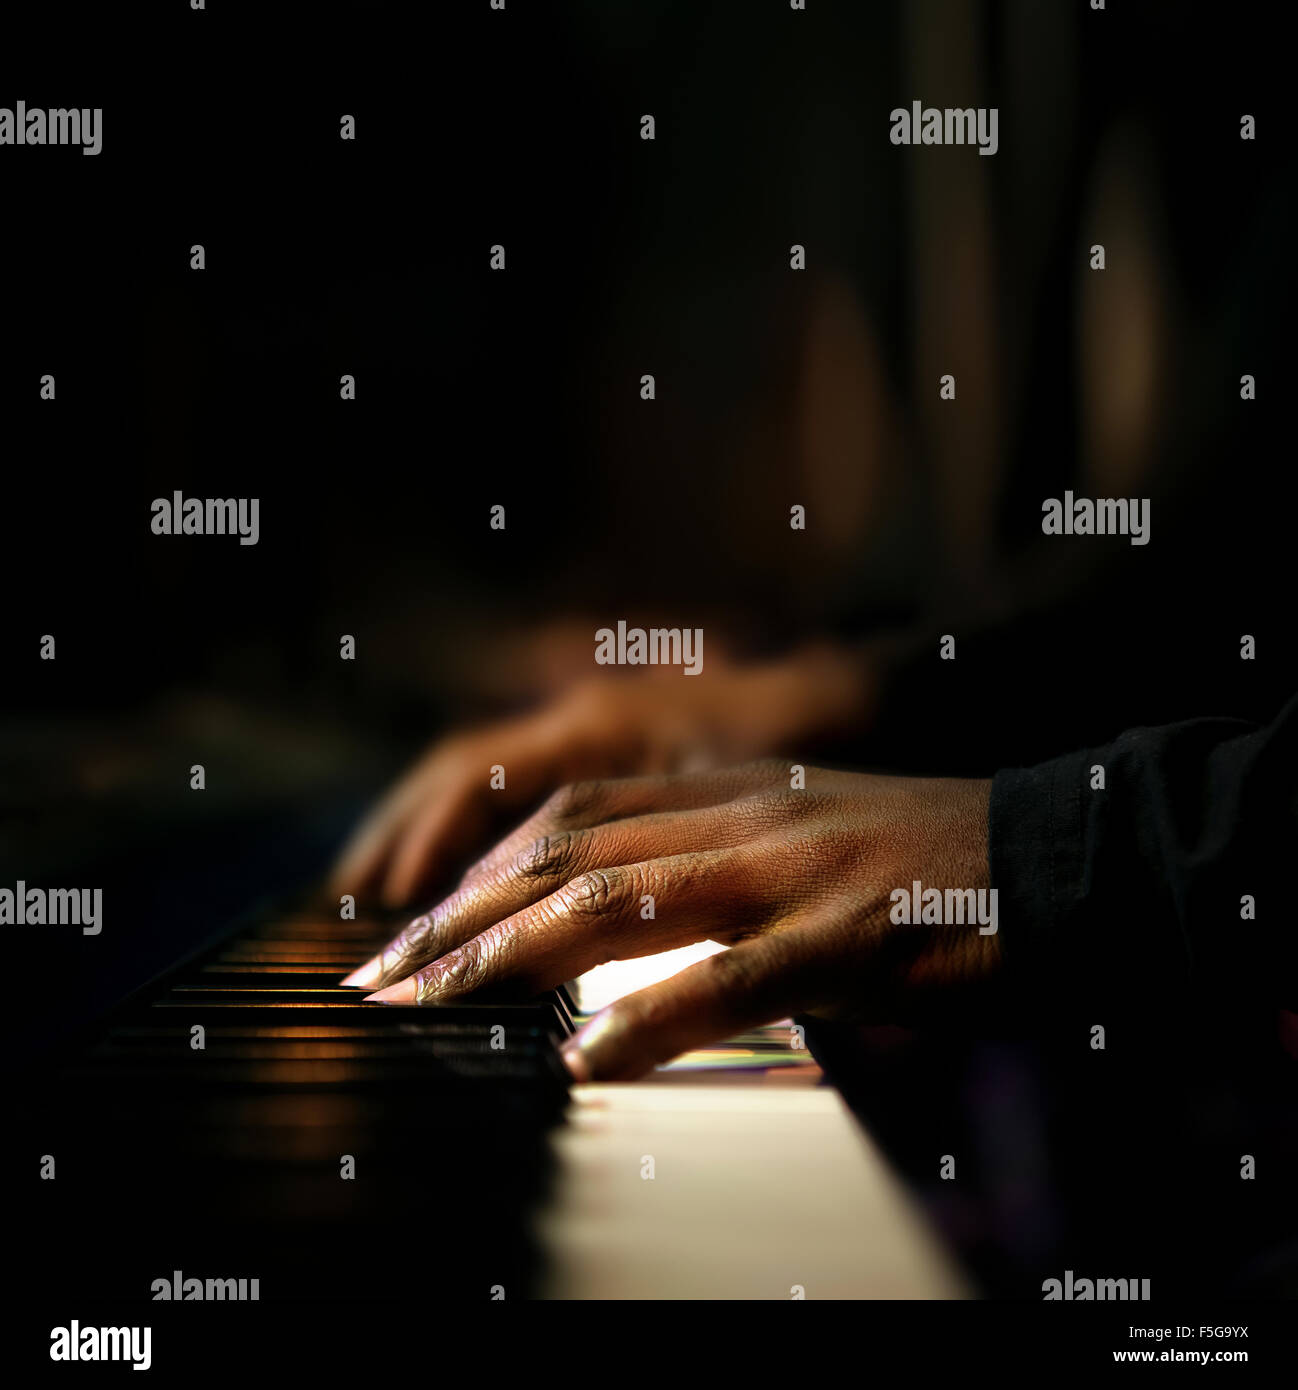 Hands of pianist playing synthesizer close-up Stock Photo